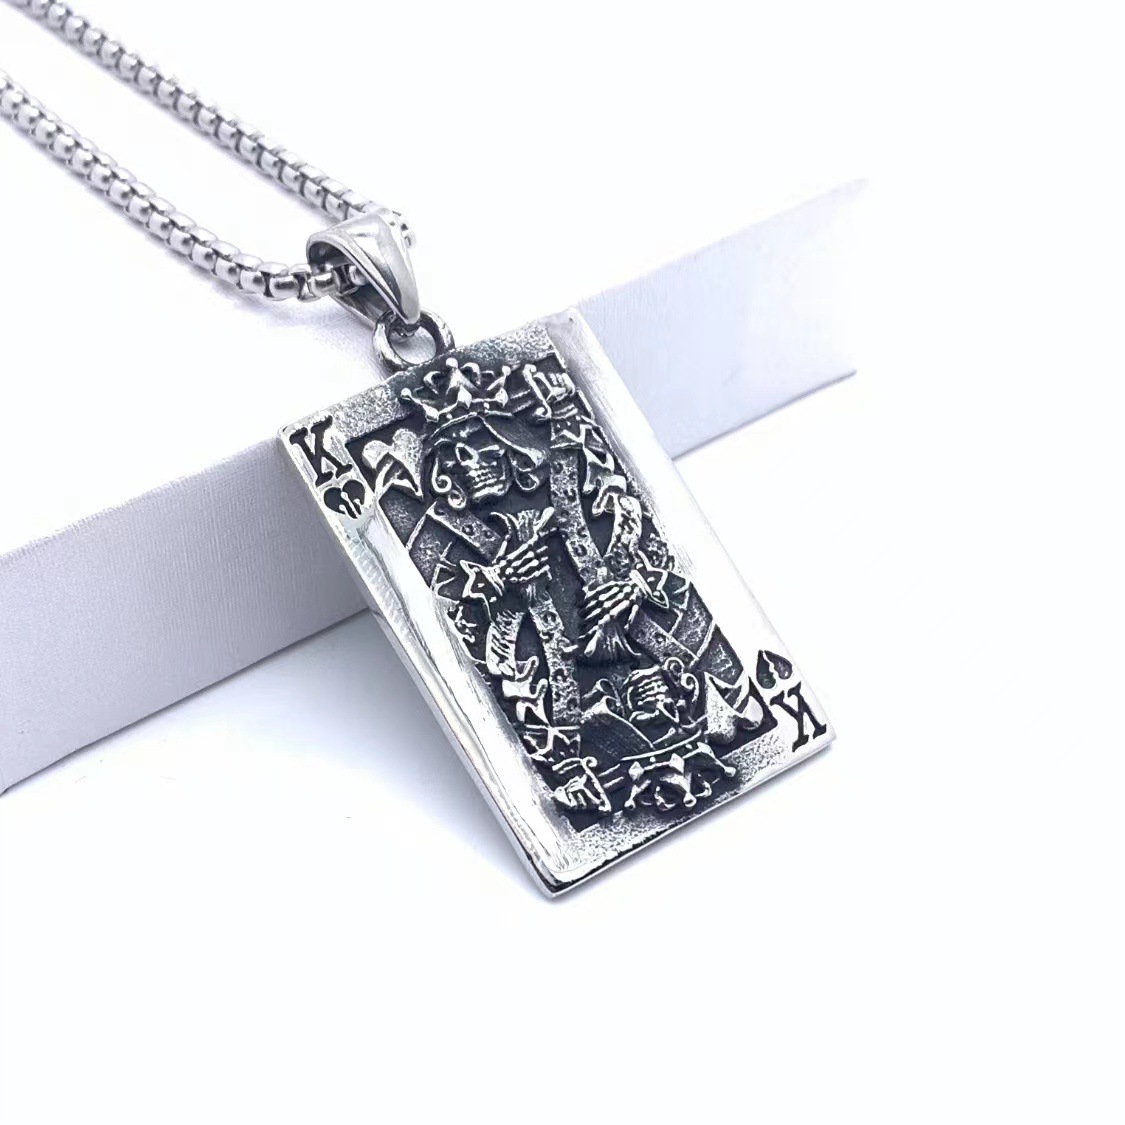 Type A pendant (without matching chain)-39 * 26mm